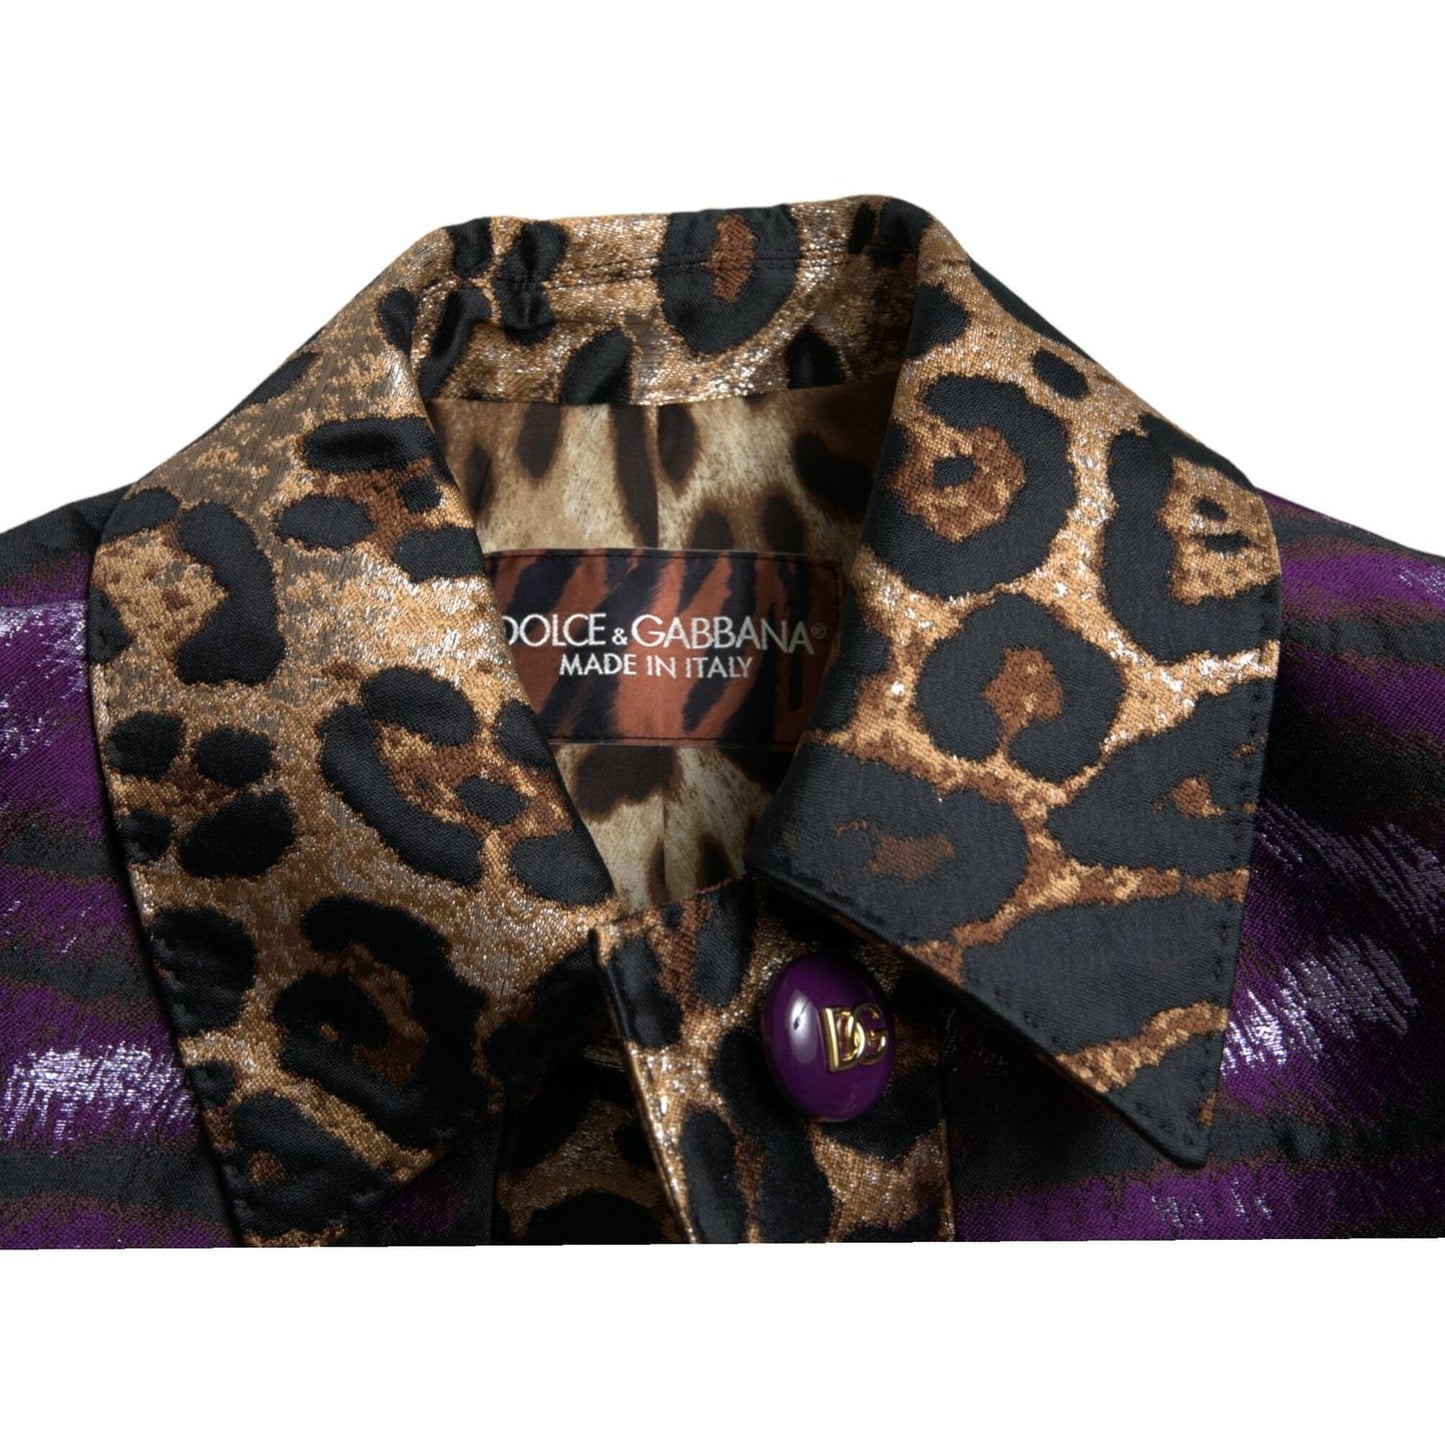 Dolce & Gabbana Exquisite Jacquard Trench With Tiger Motif purple-lame-jacquard-tiger-print-coat-jacket